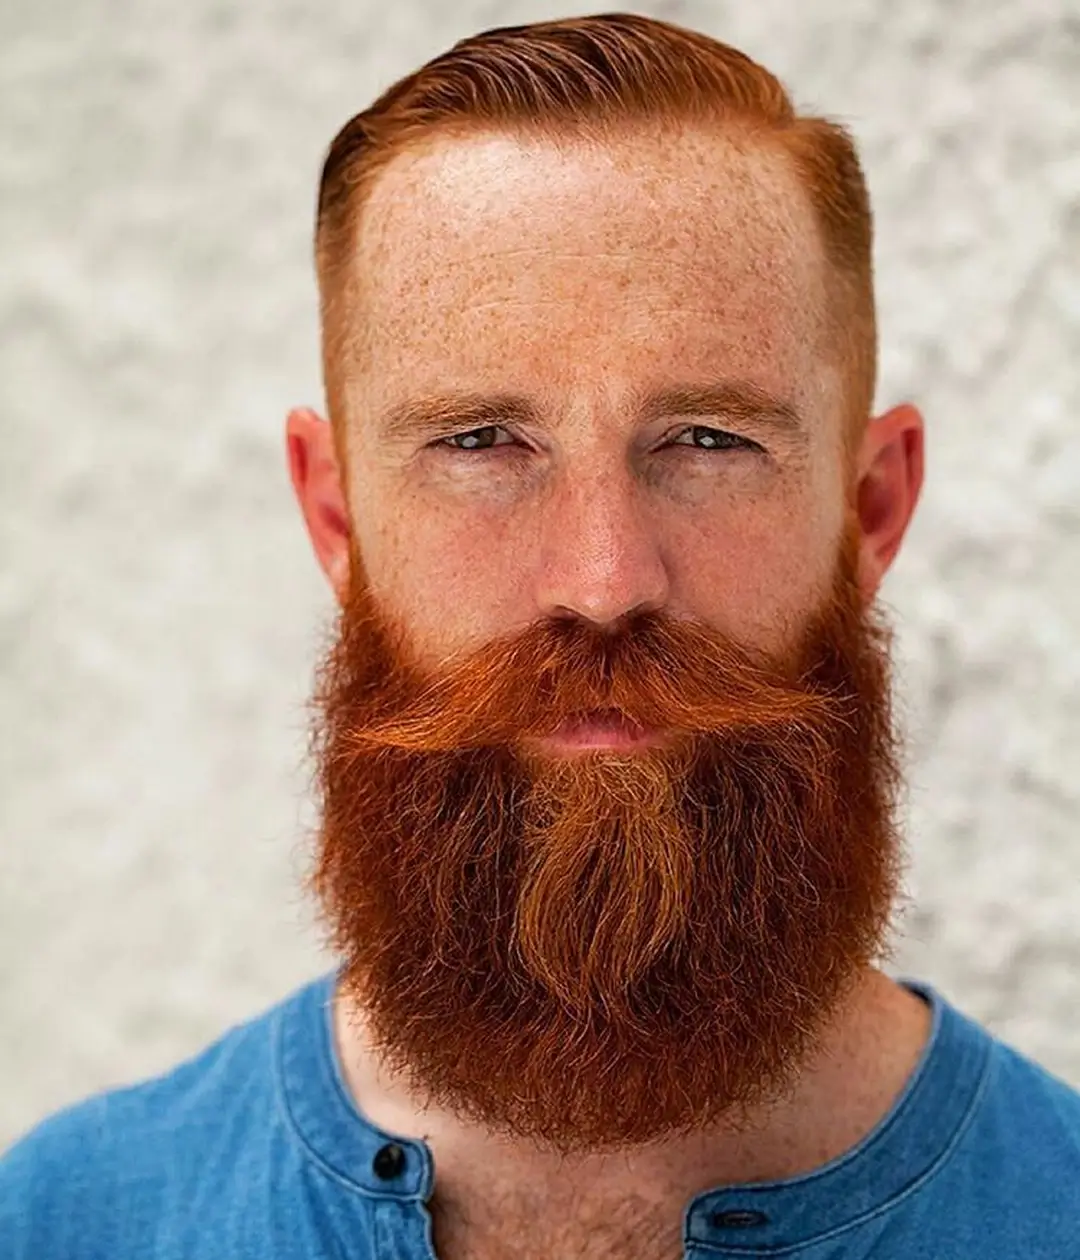 Men's Medium Viking Beard from Fifth Ave Barber Shop in Midtown NYC